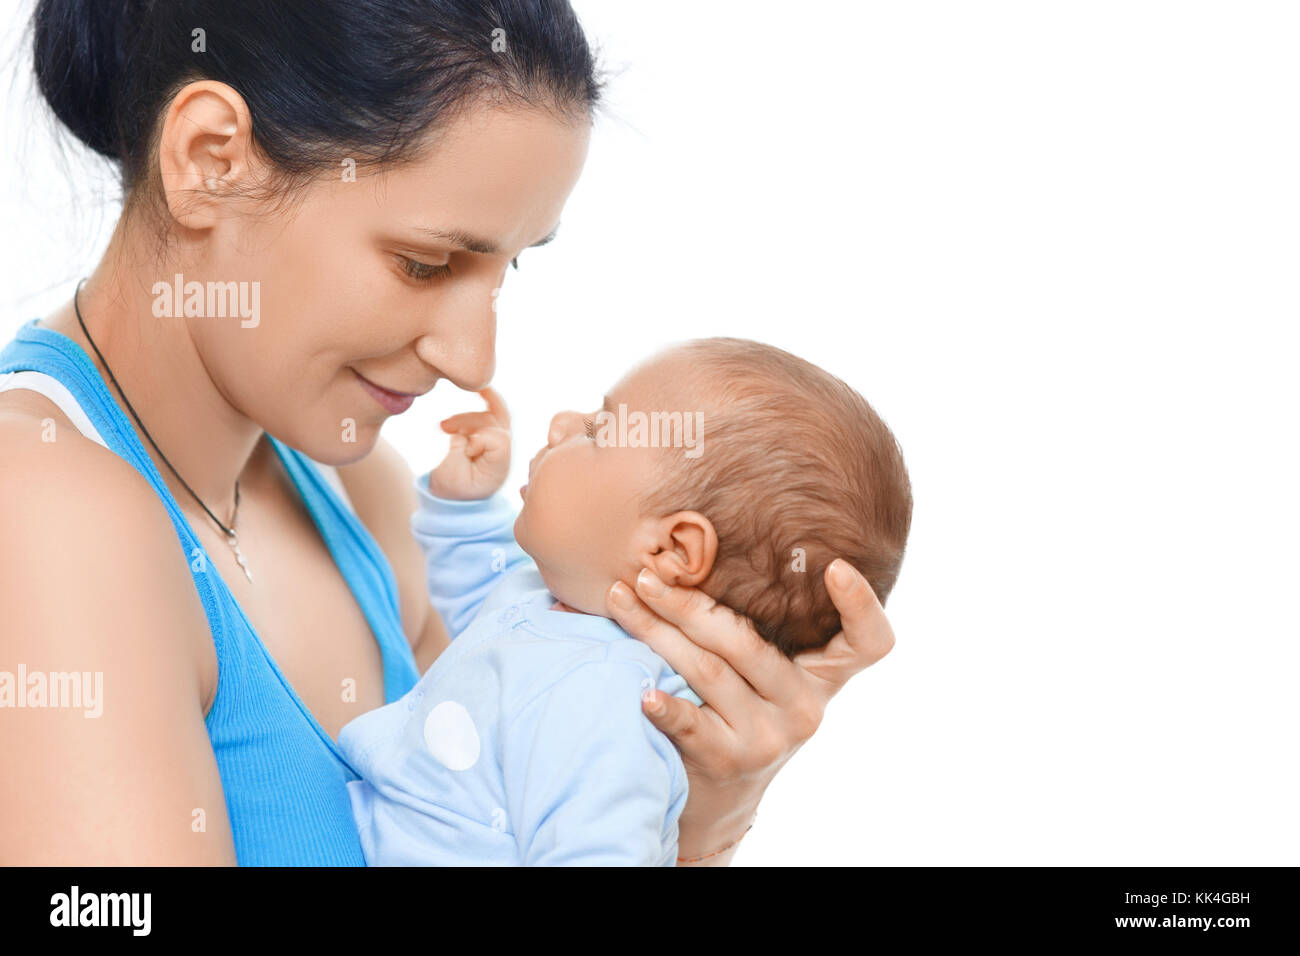 mother holding and kissing newborn baby Stock Photo